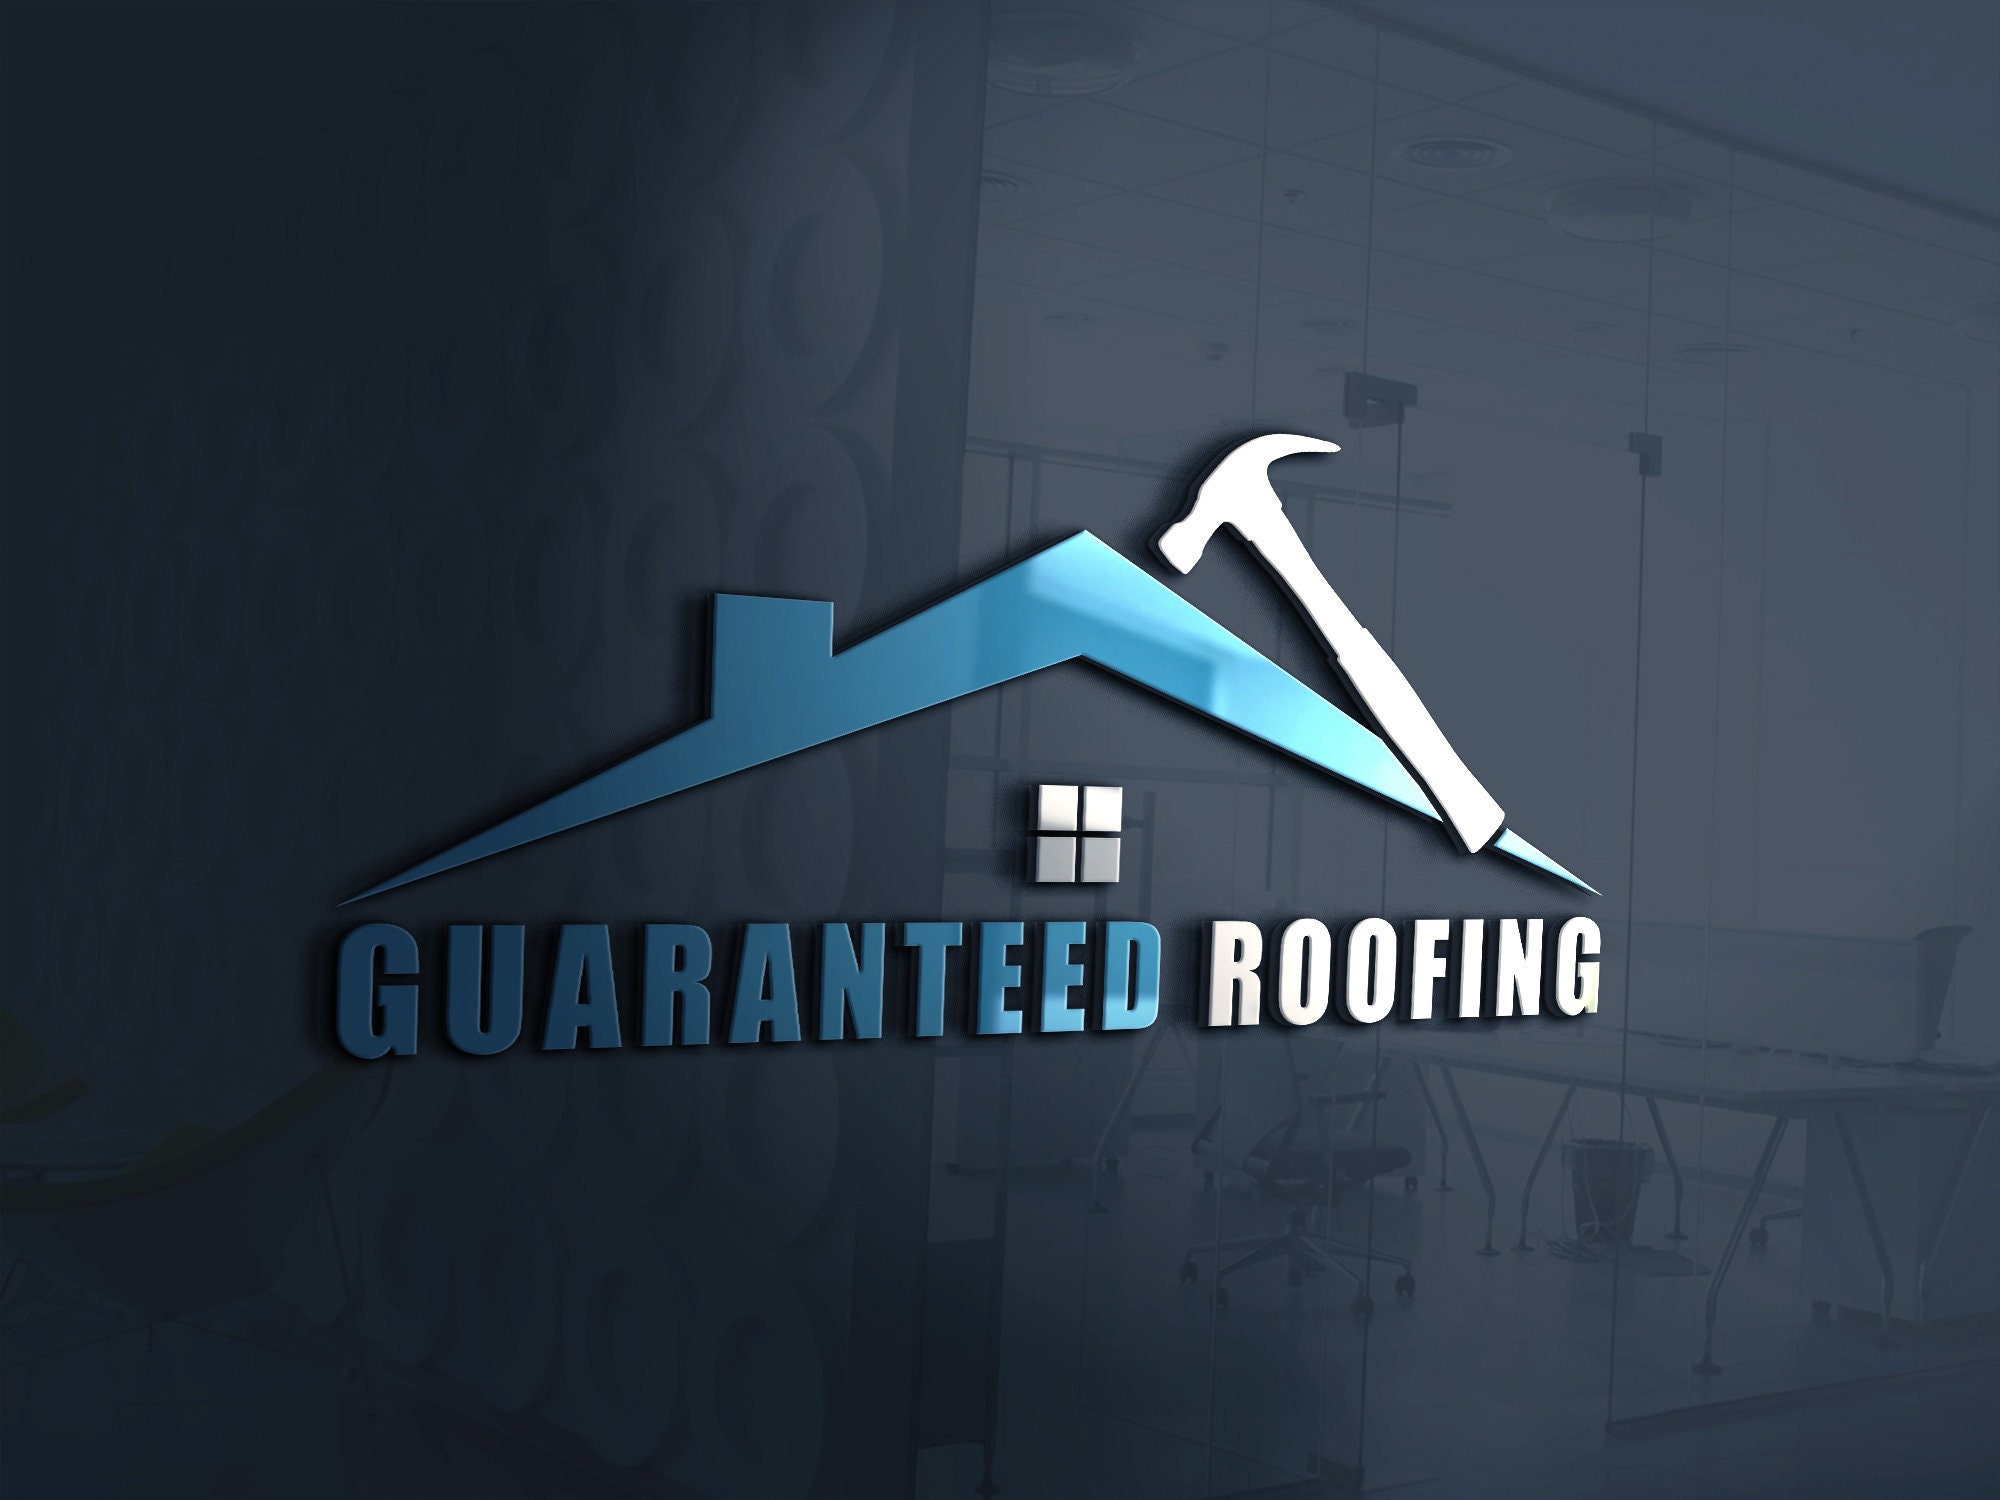 Blank Roofing Logos